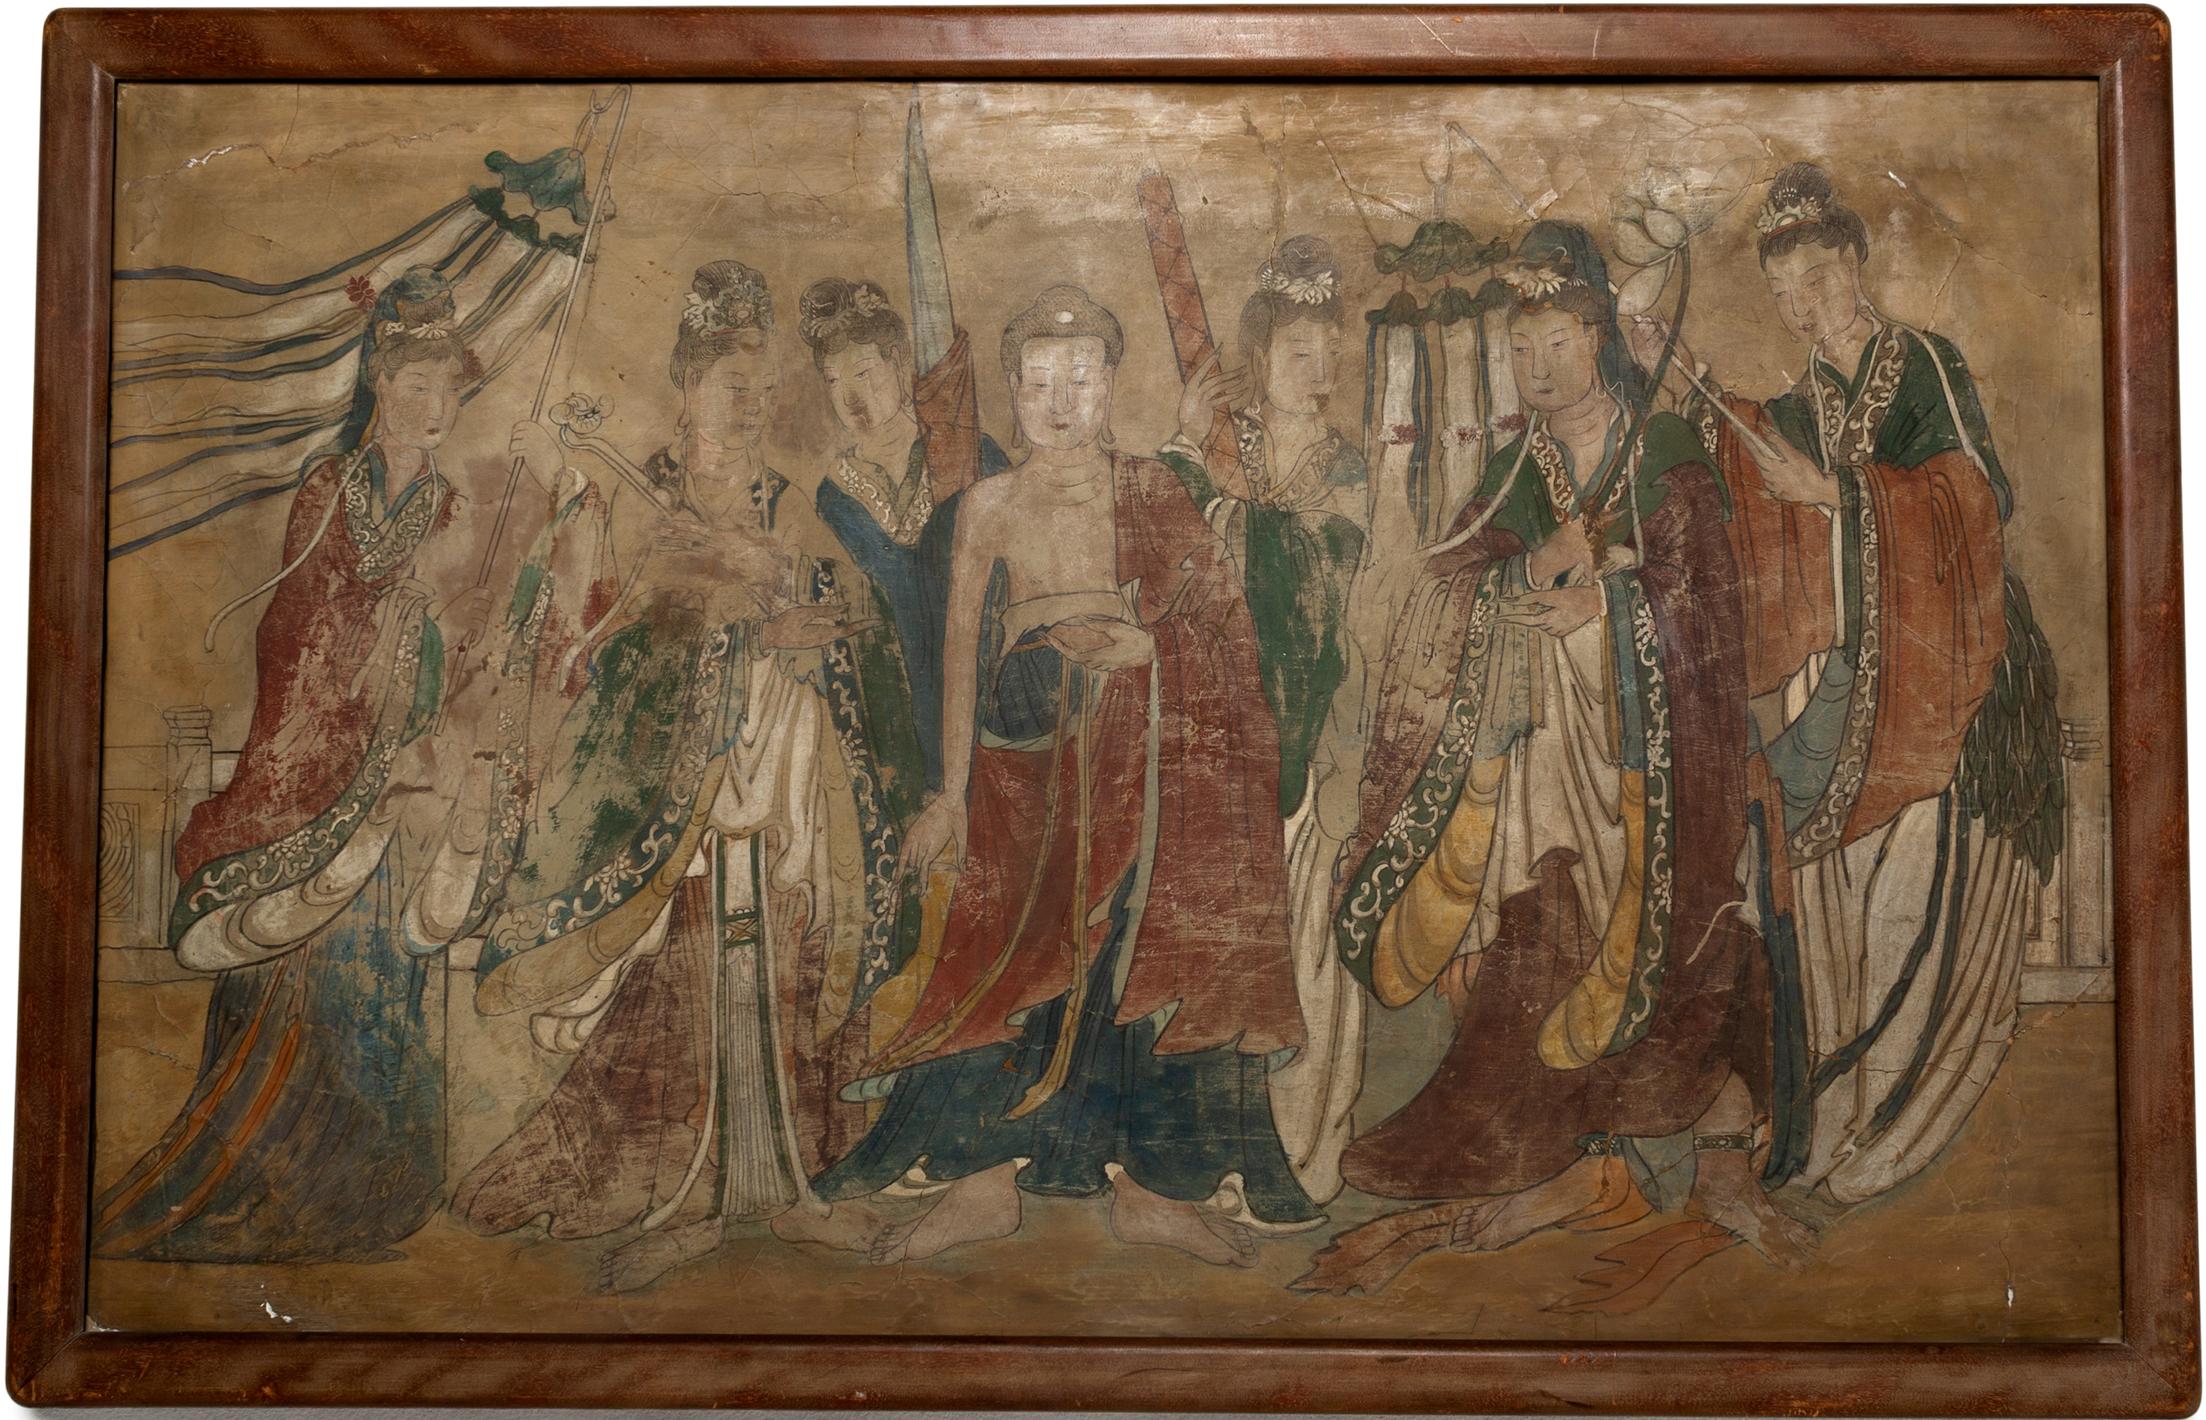 Unknown Figurative Painting - "Buddha Flanked by Female Attendants, " Gouache on Wood Panel, c. 1600